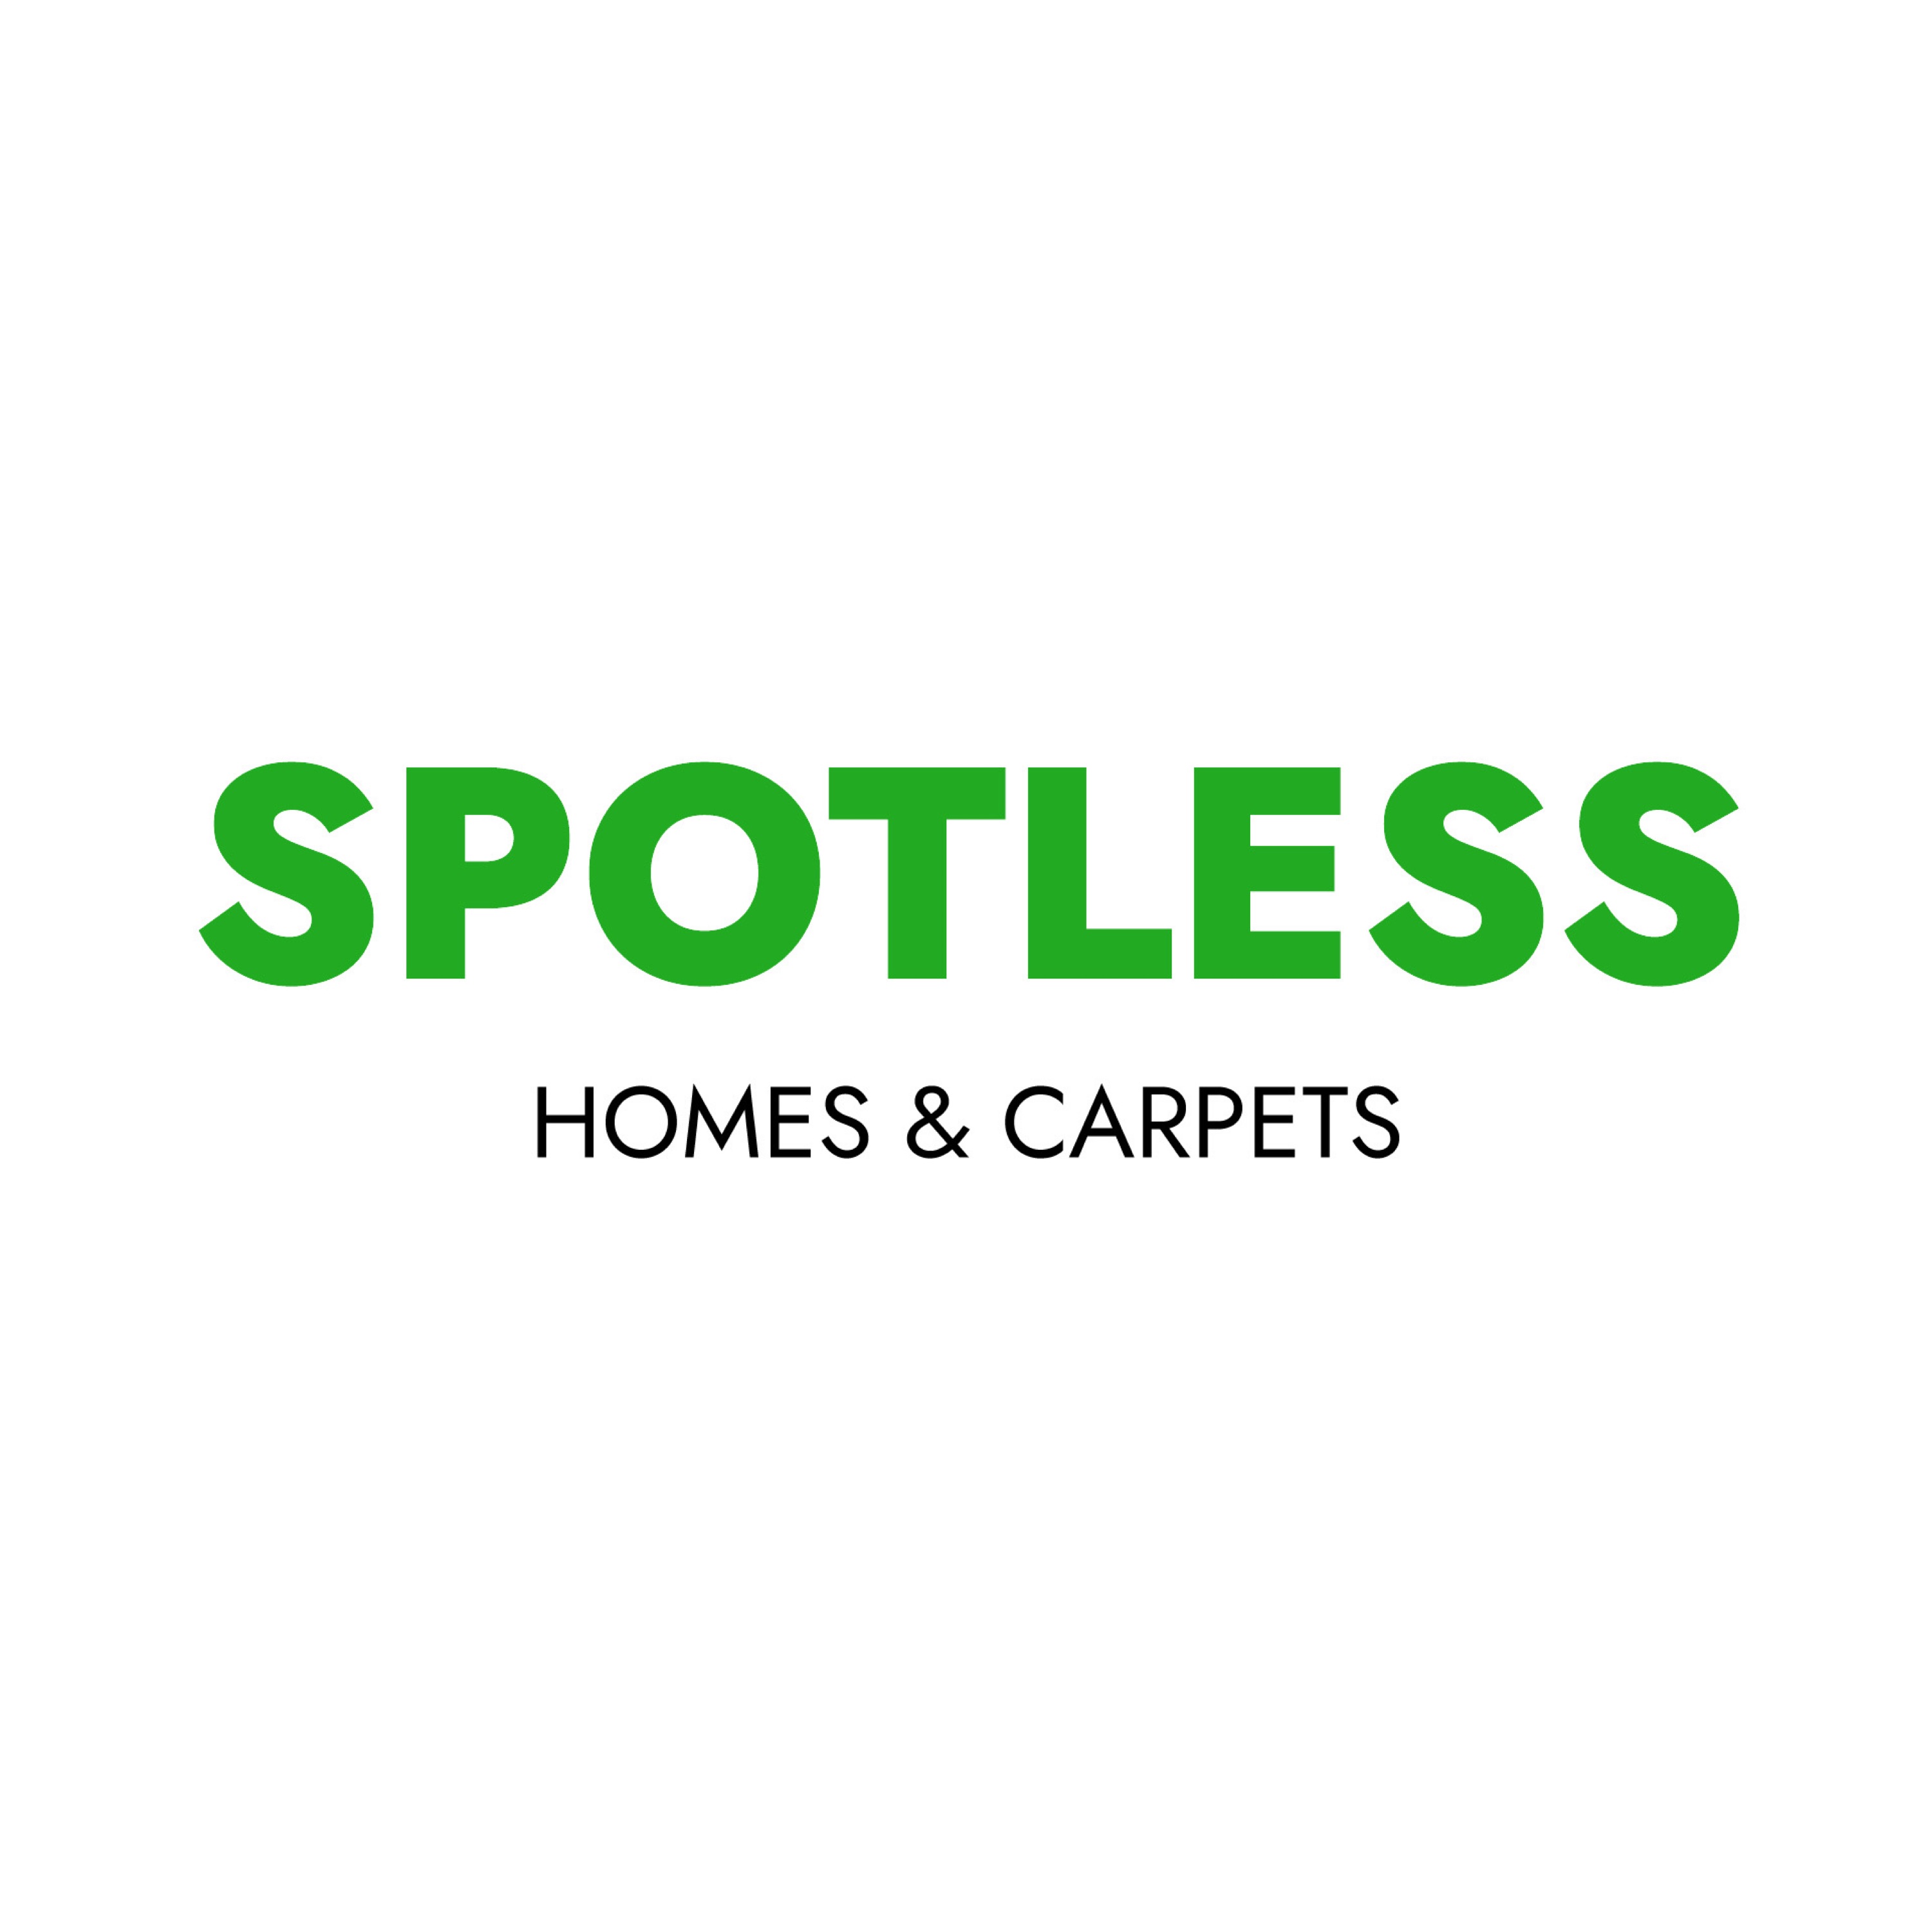 Spotless Homes & Carpets-Unlicensed Contractor Logo